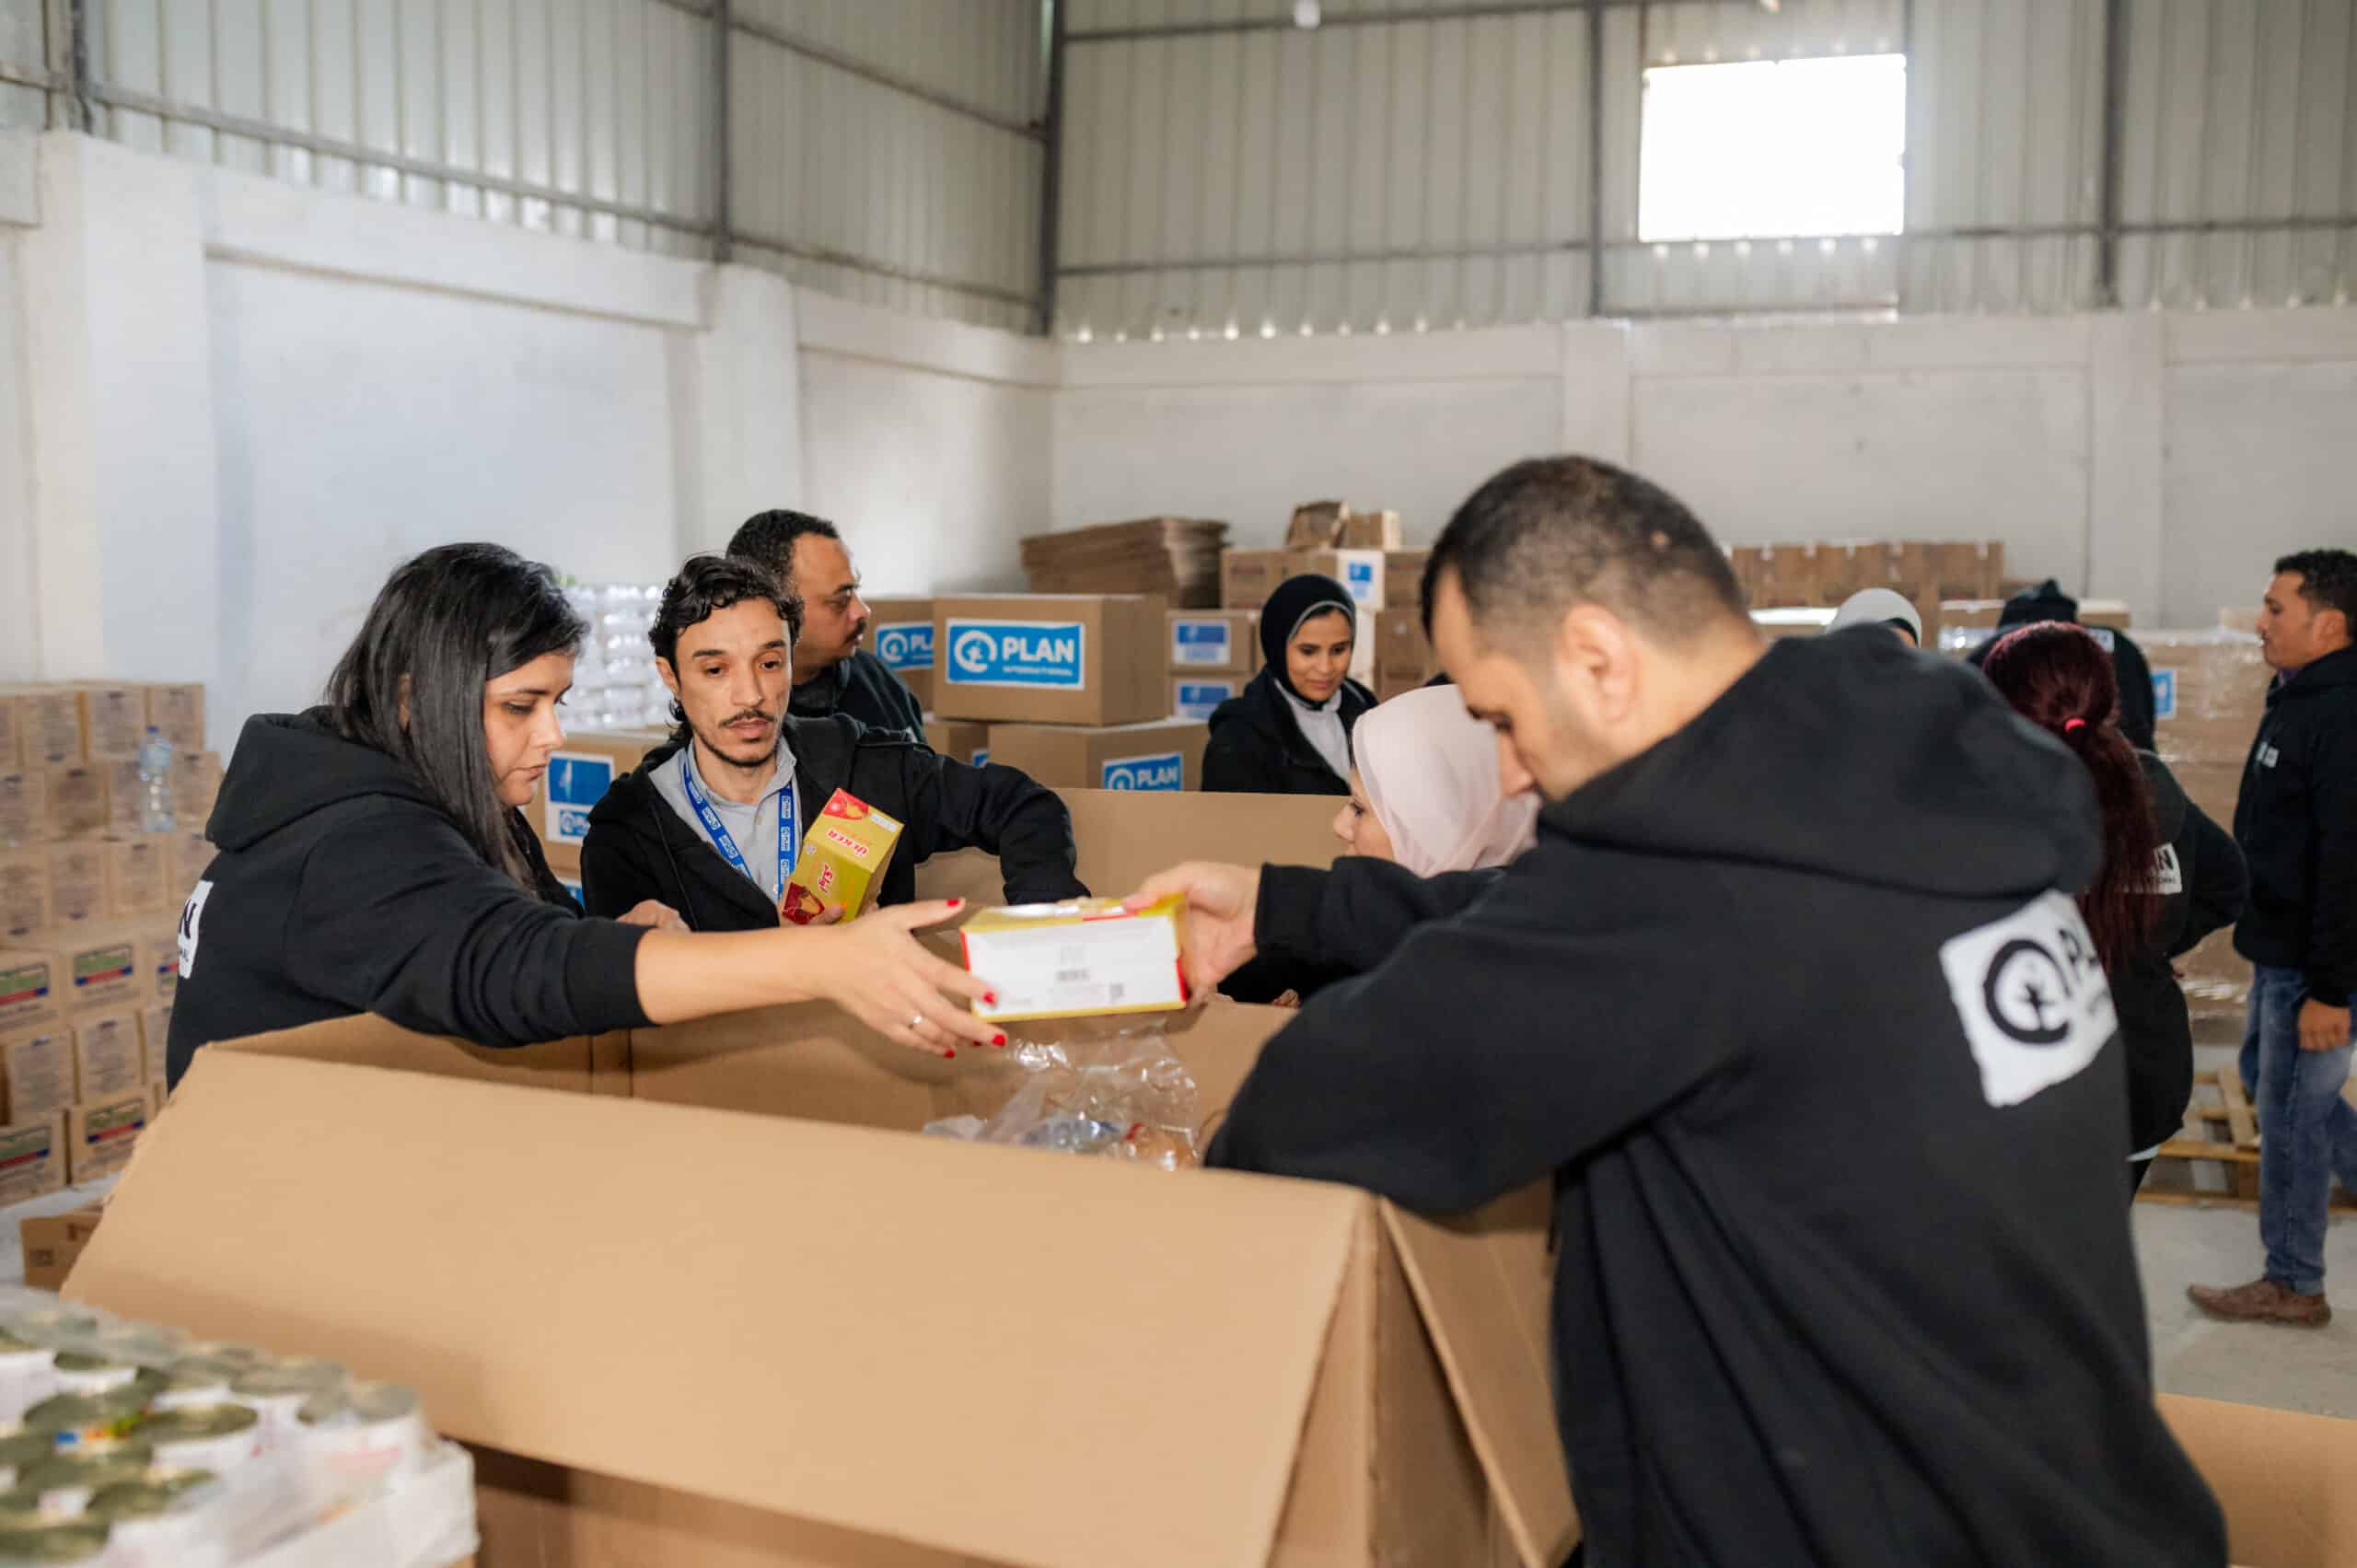 Plan International staff in Egypt readying boxes of food to be transported across the border into Gaza.